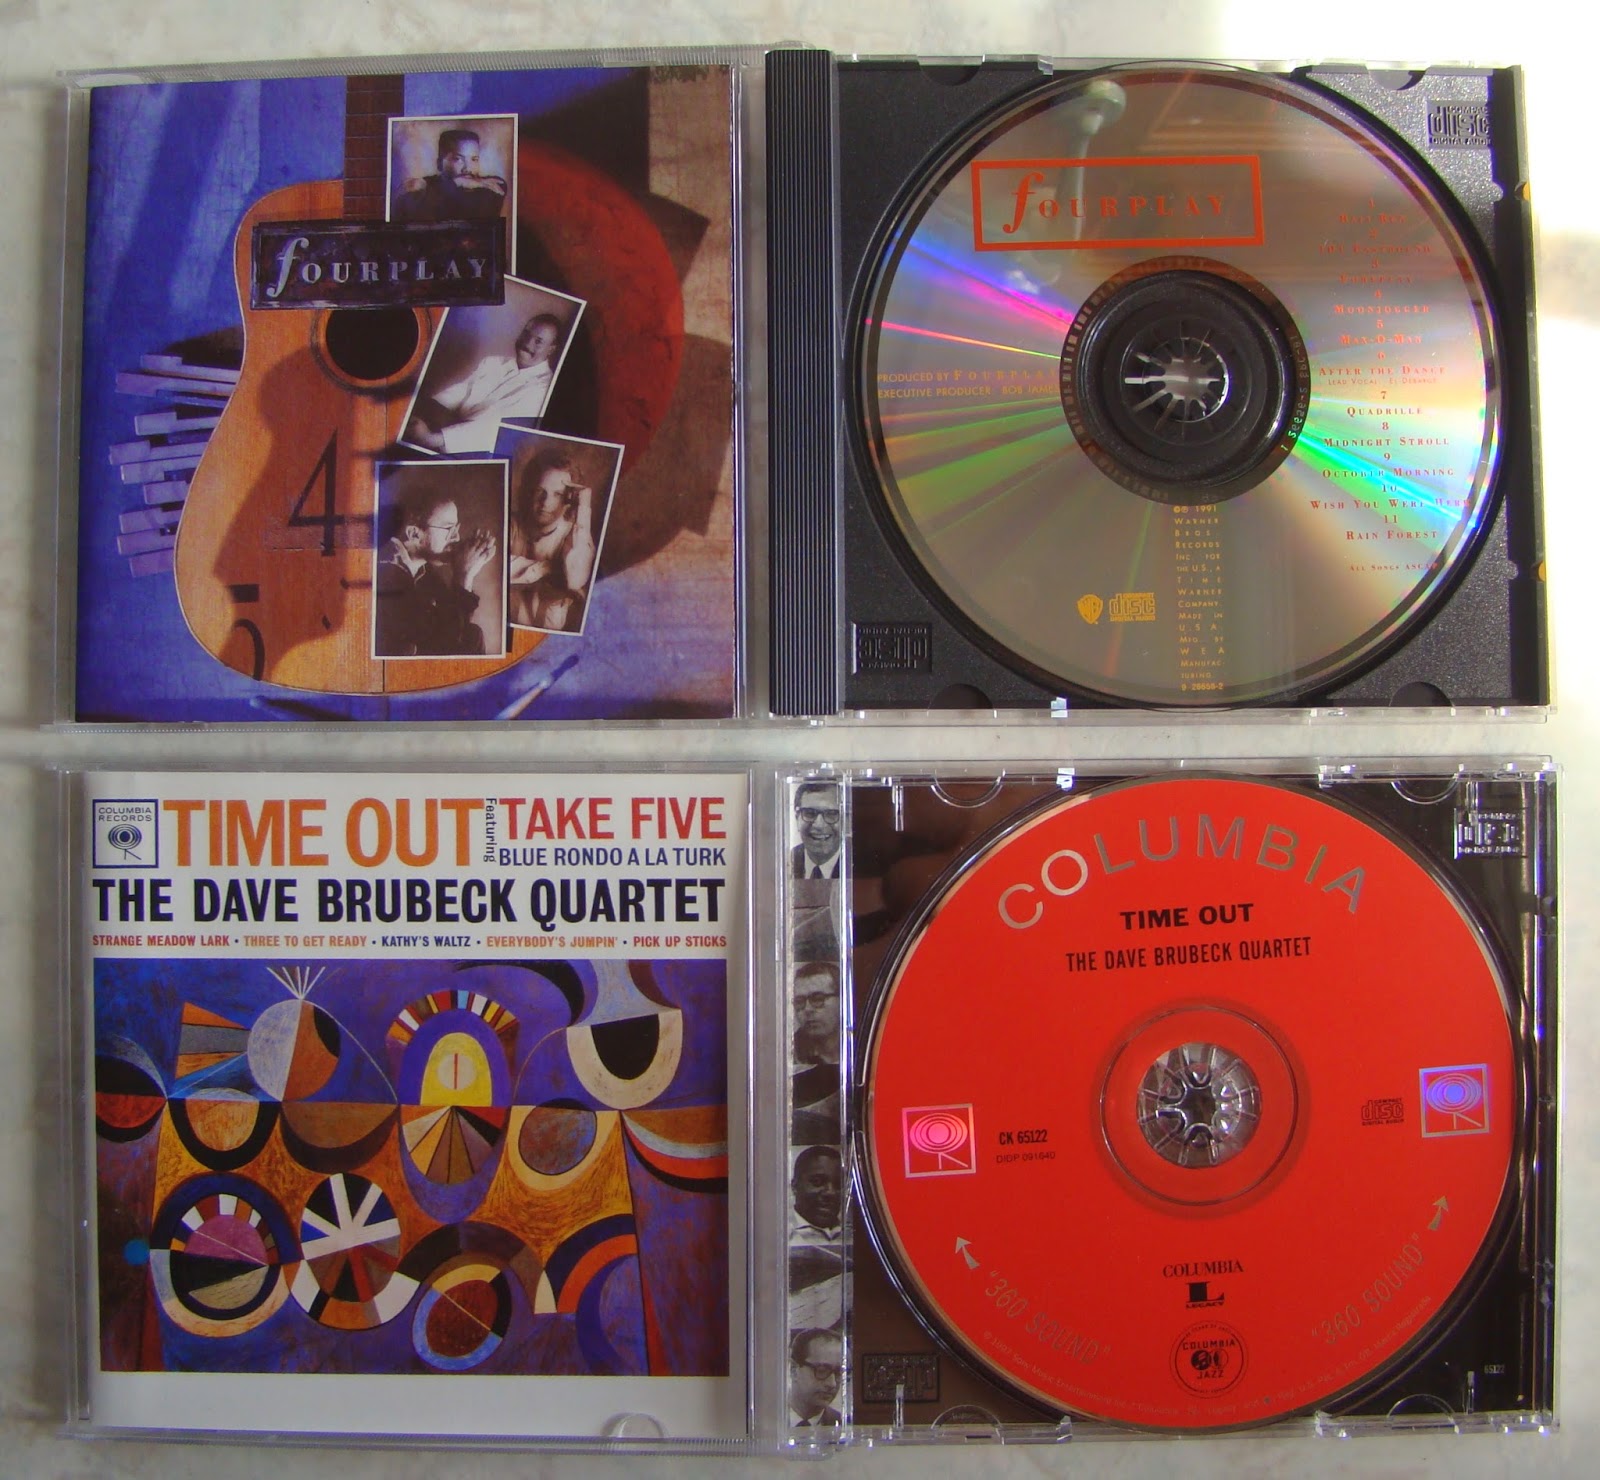 Imported audiophile CDs (sold) CD+four+play